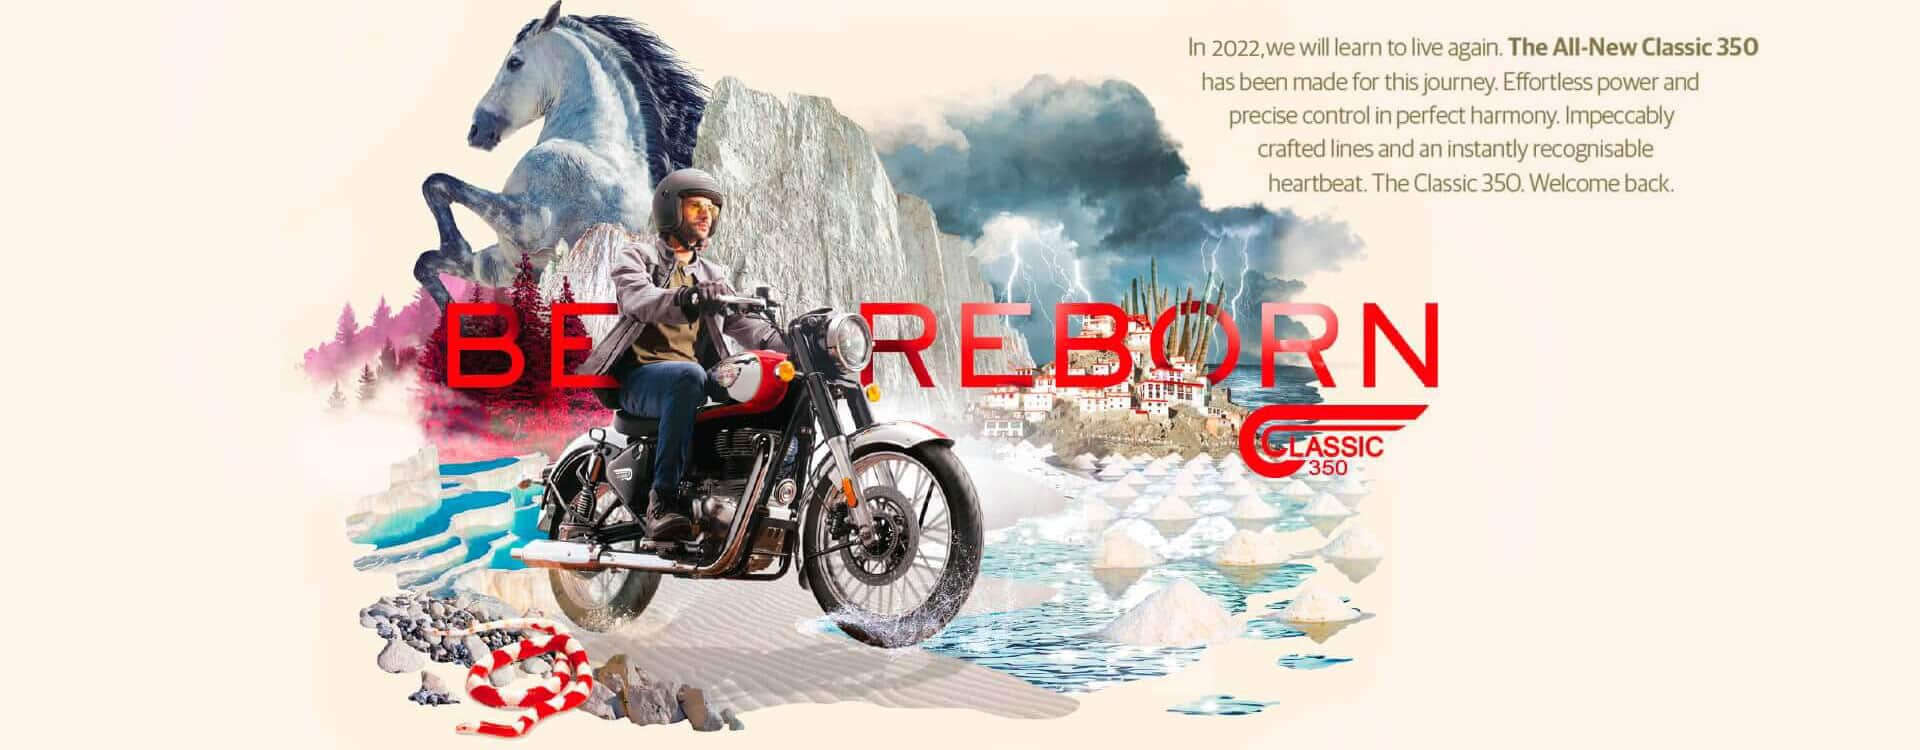 The all new Royal Enfield Classic 350 has been reborn